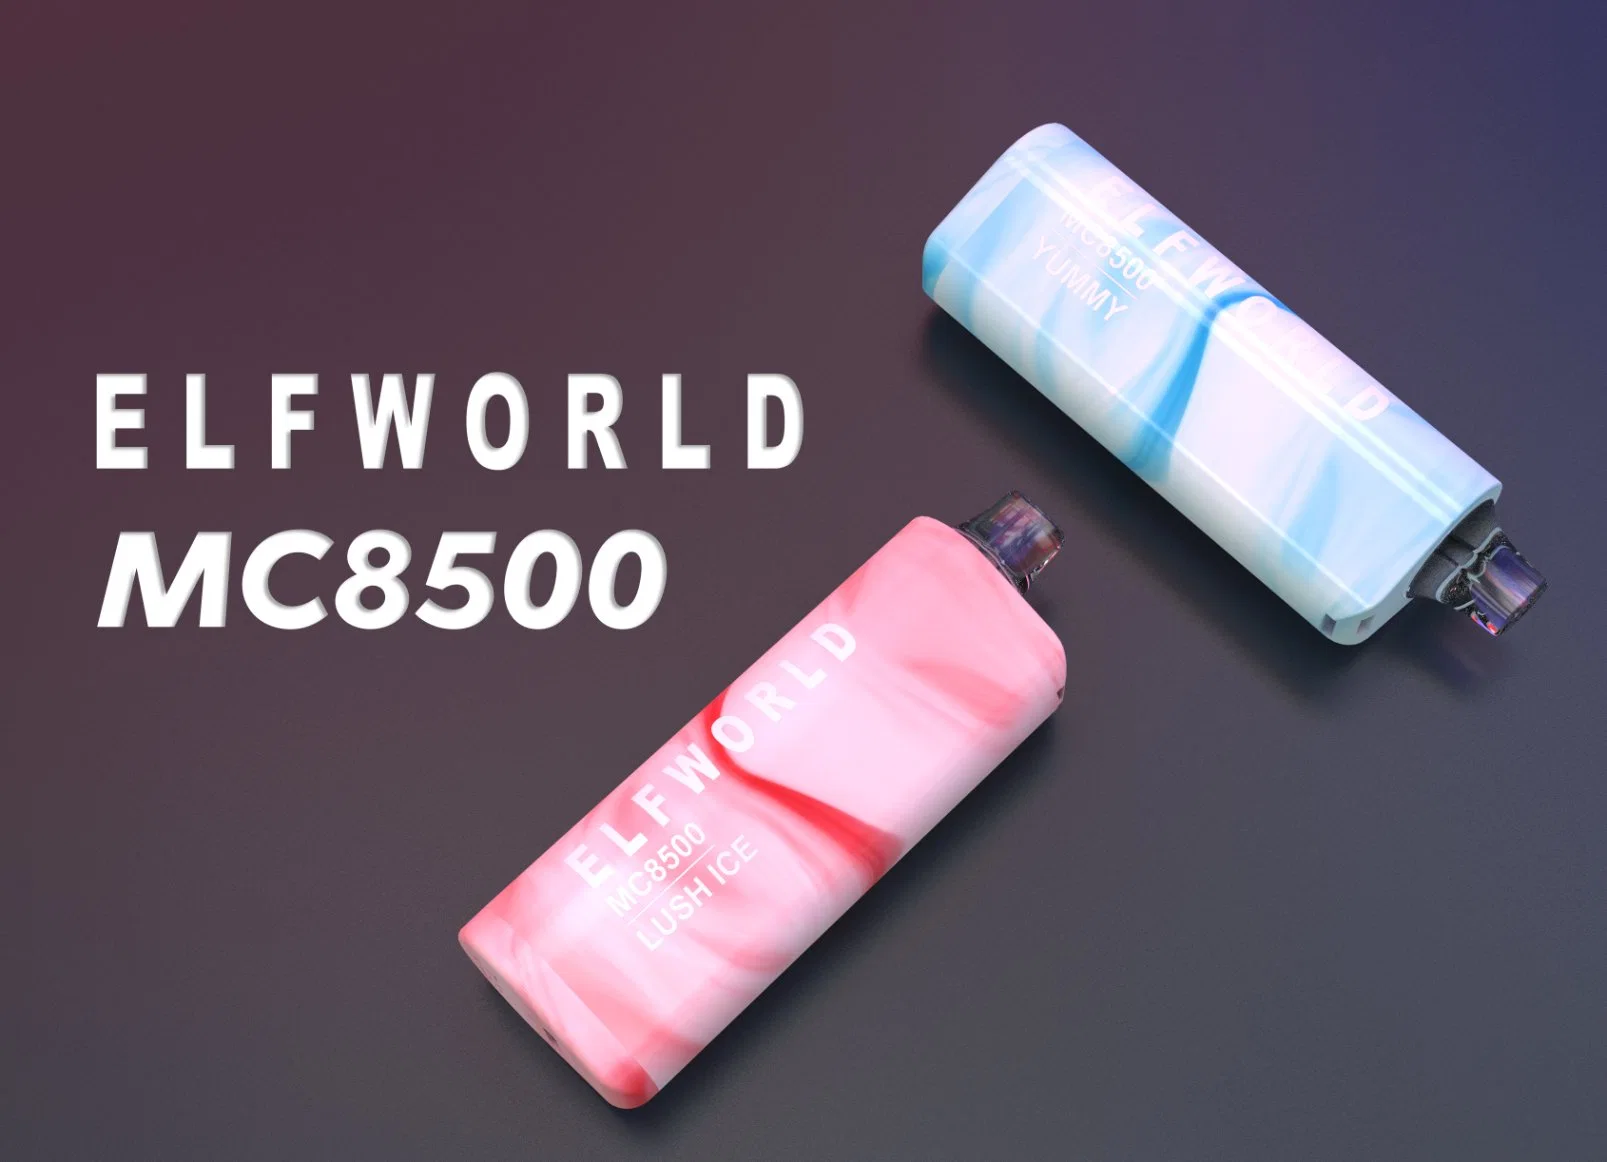 Hot Elfworld Mc8500 Wholesale/Supplier I Electronic Cigarette Crystal Puff Lost Elf World Orion 12000 7500 Disposable/Chargeable Mary Vape Taste RM Mo5000 Puf Bar